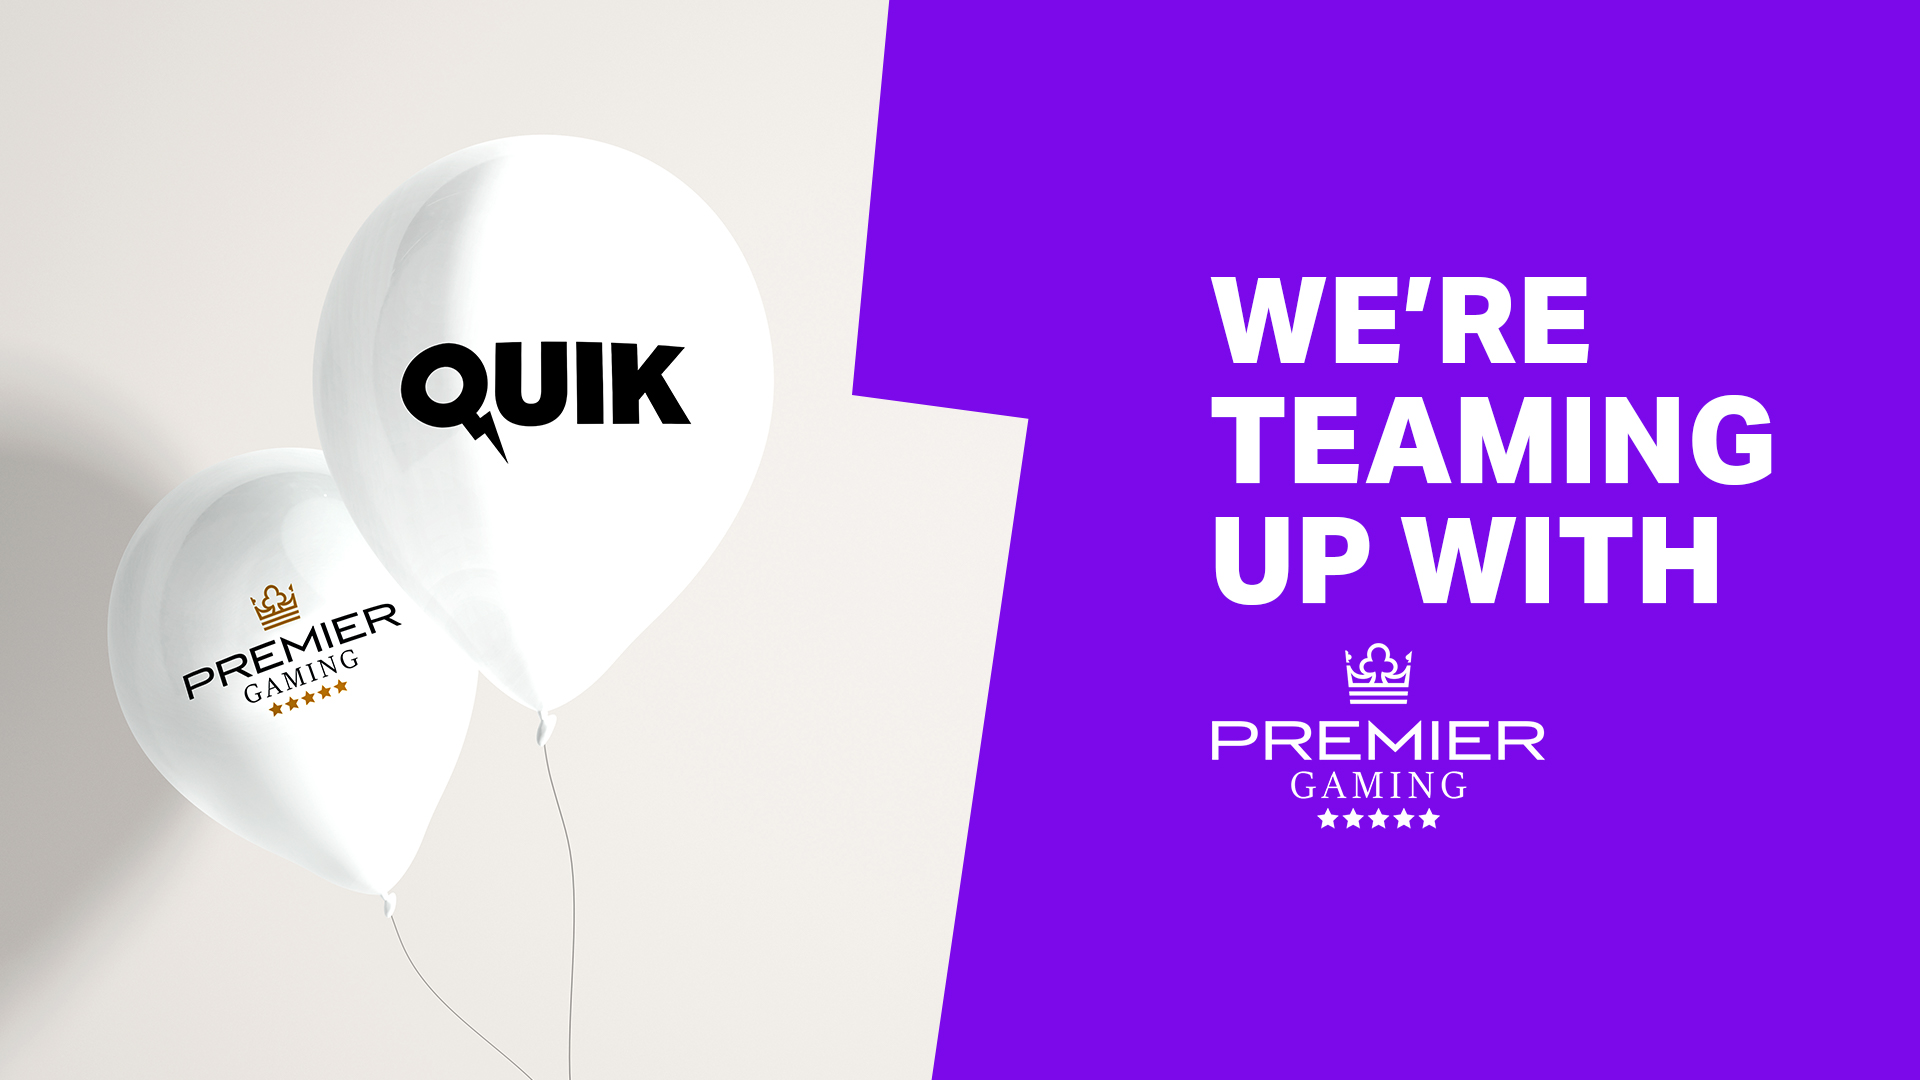 QUIK Gaming seals agreement with Premier Gaming